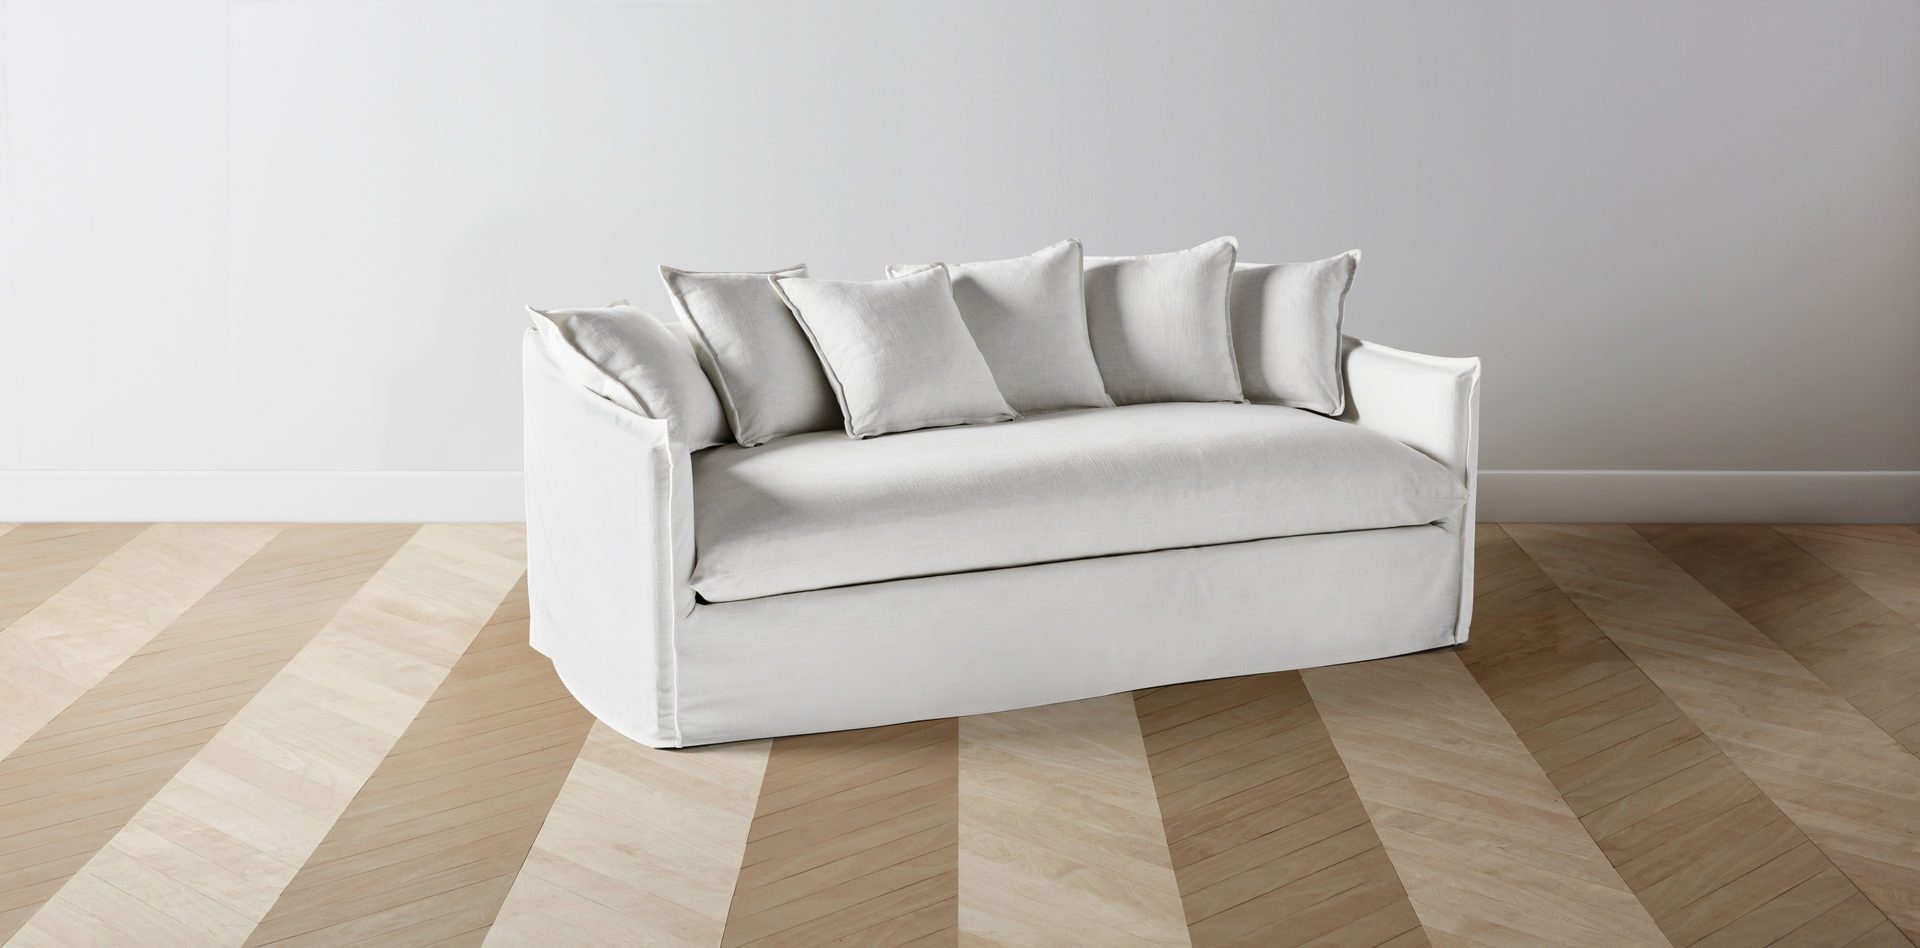 The Dune - Sofa 85" Wide - Image 3